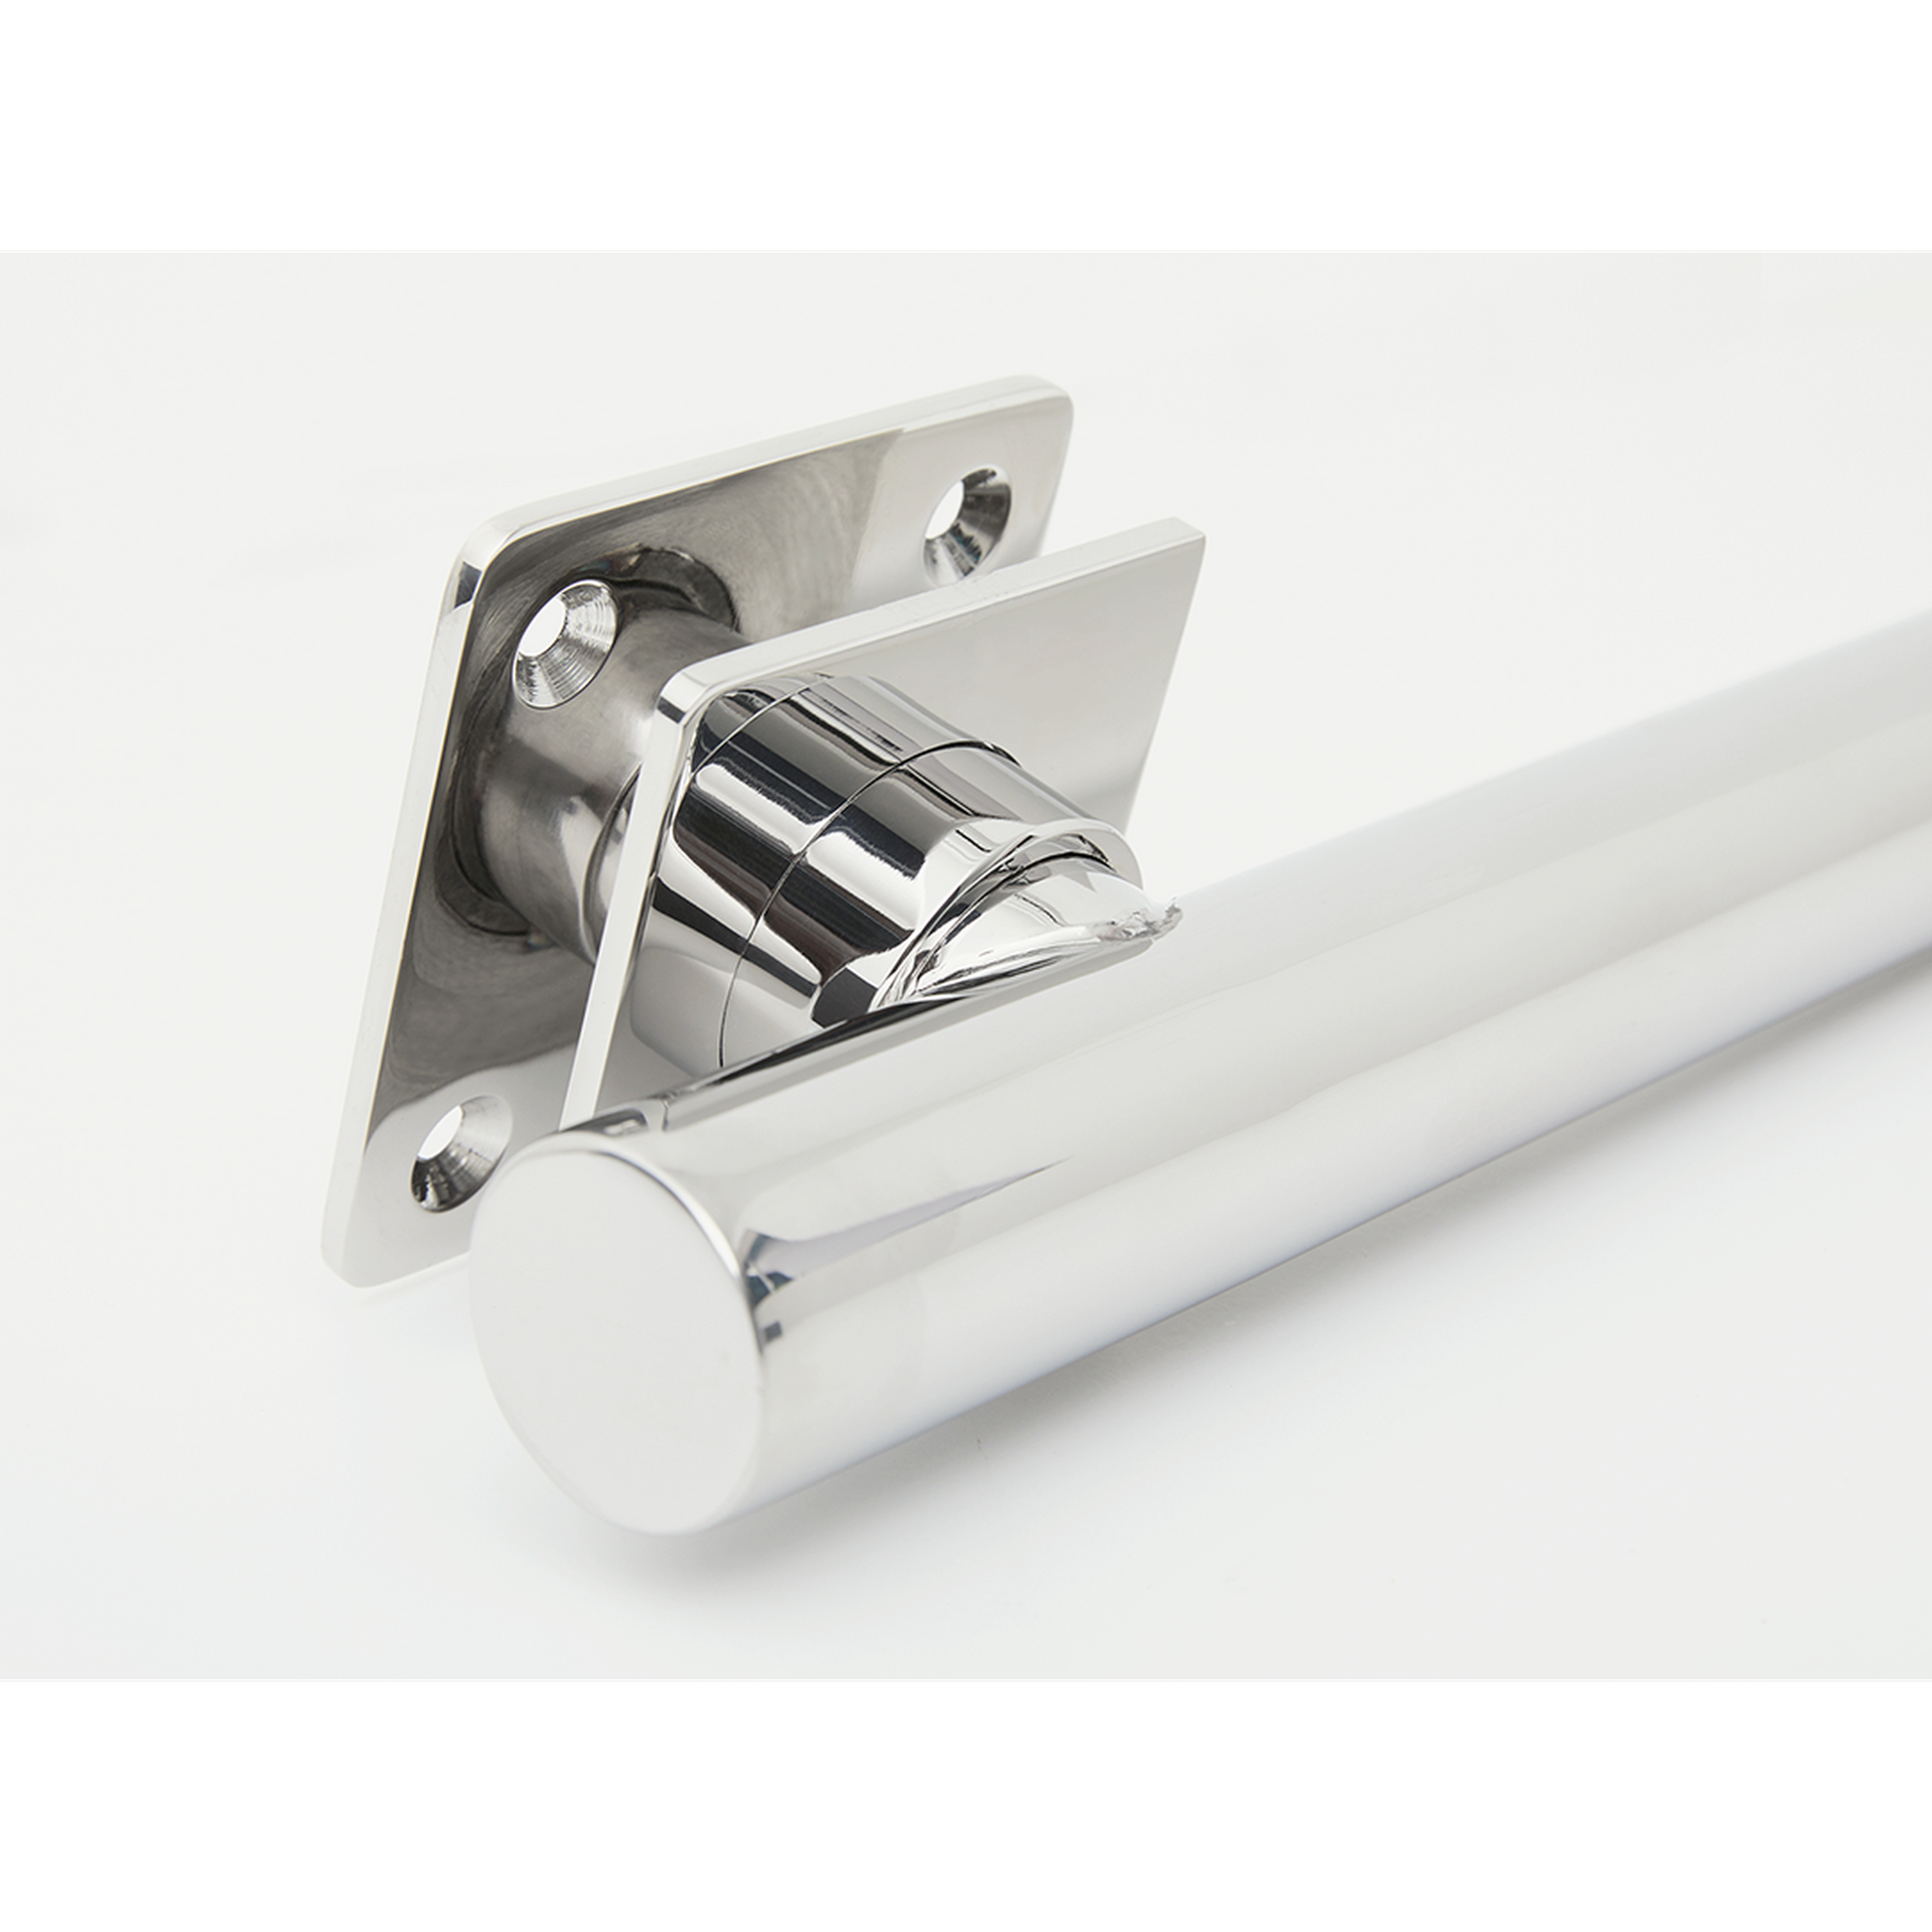 Seachrome Coronado 24" Polished Stainless Steel 1.25" Concealed Square Flange Grab Bar